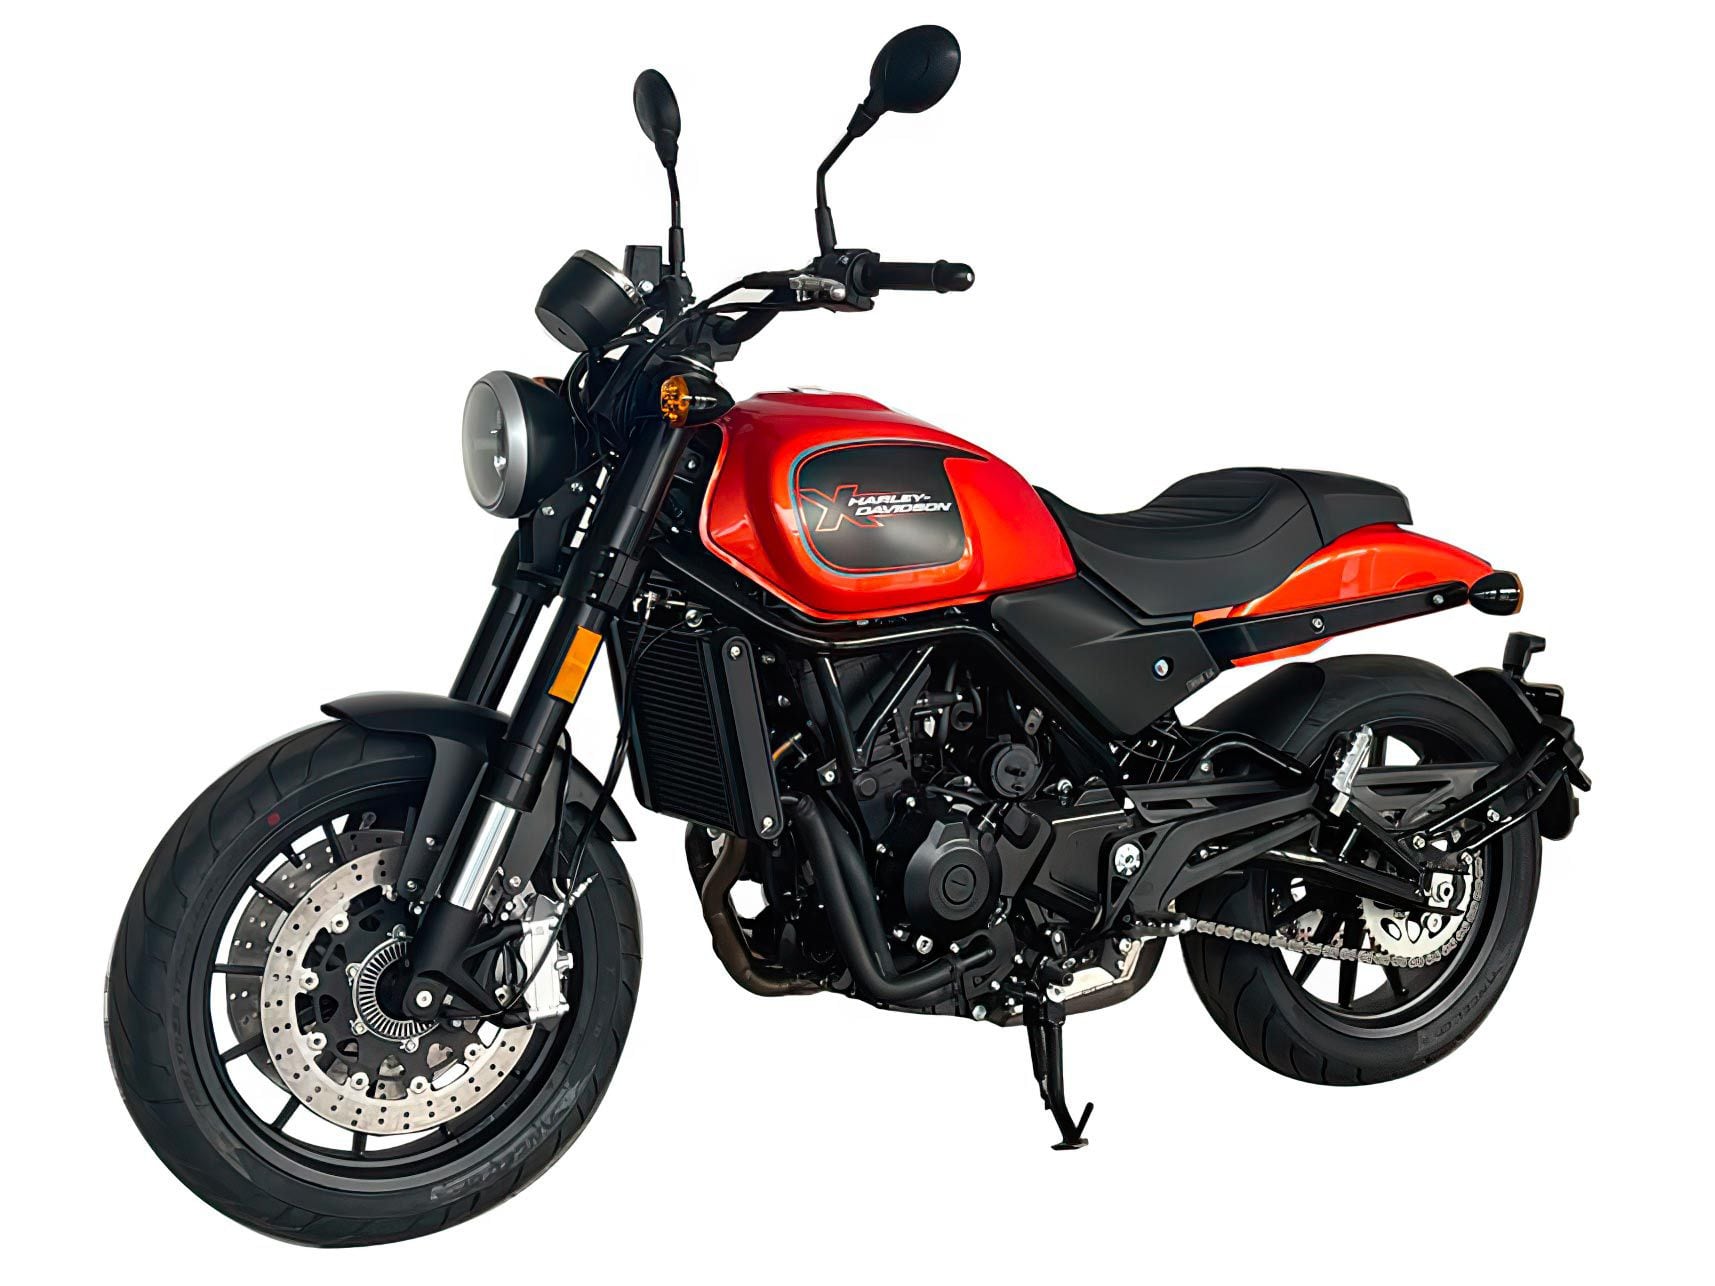 The 500cc X500 shares an engine with Benelli’s Leoncino 500.